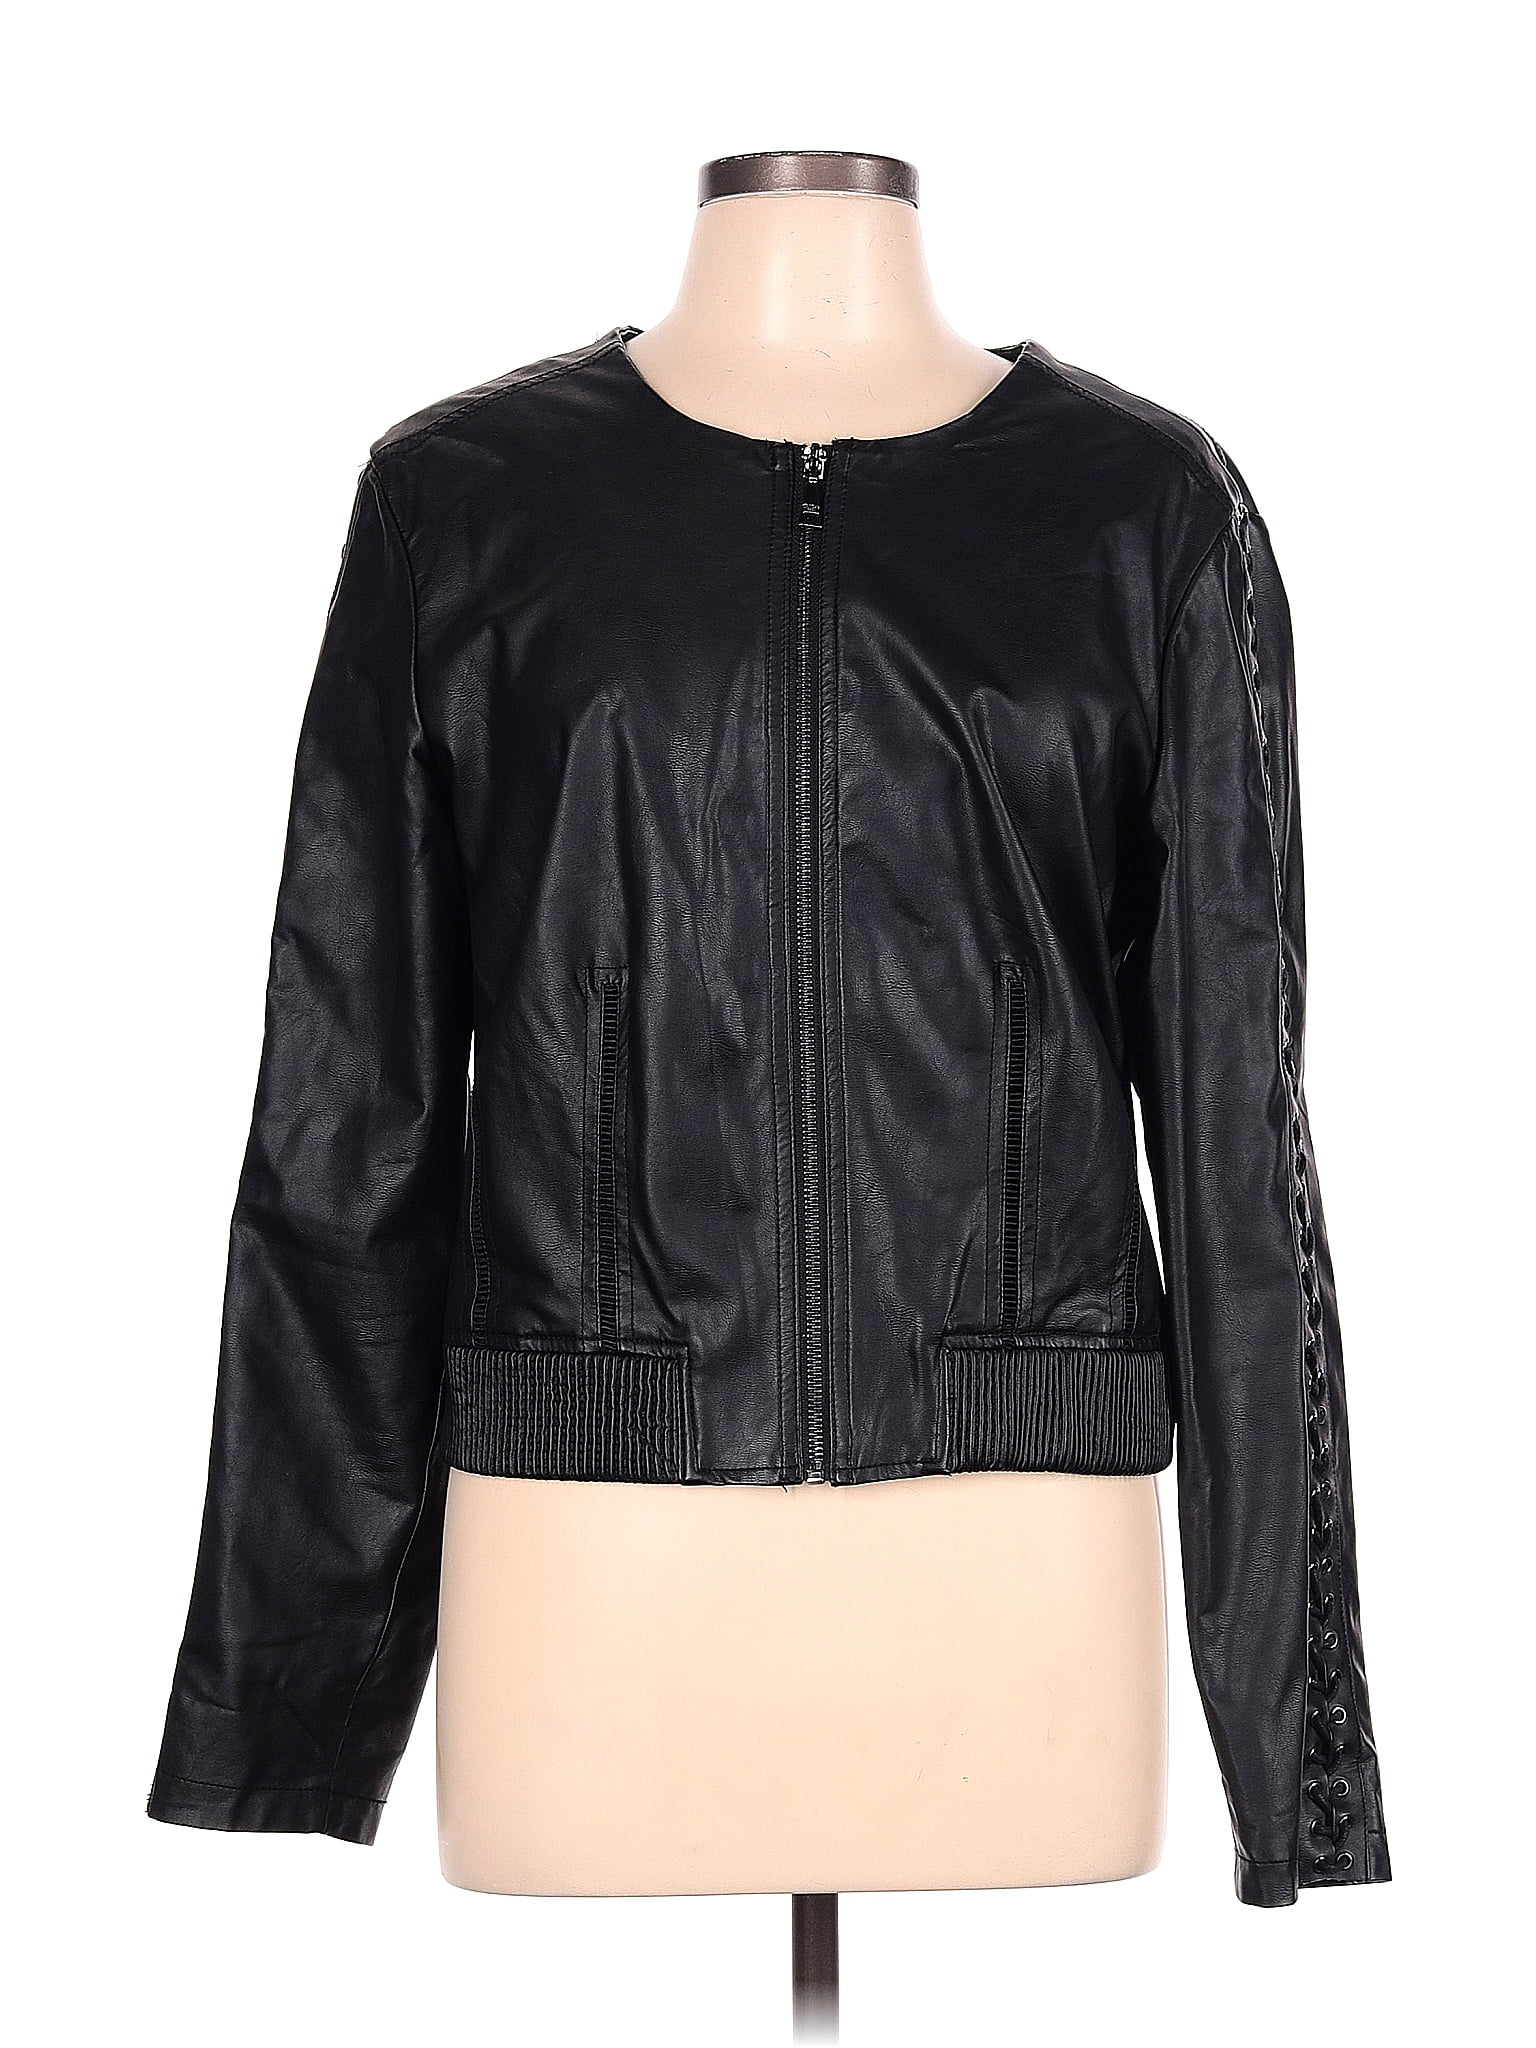 Guess Solid Black Faux Leather Jacket Size L - 70% off | thredUP